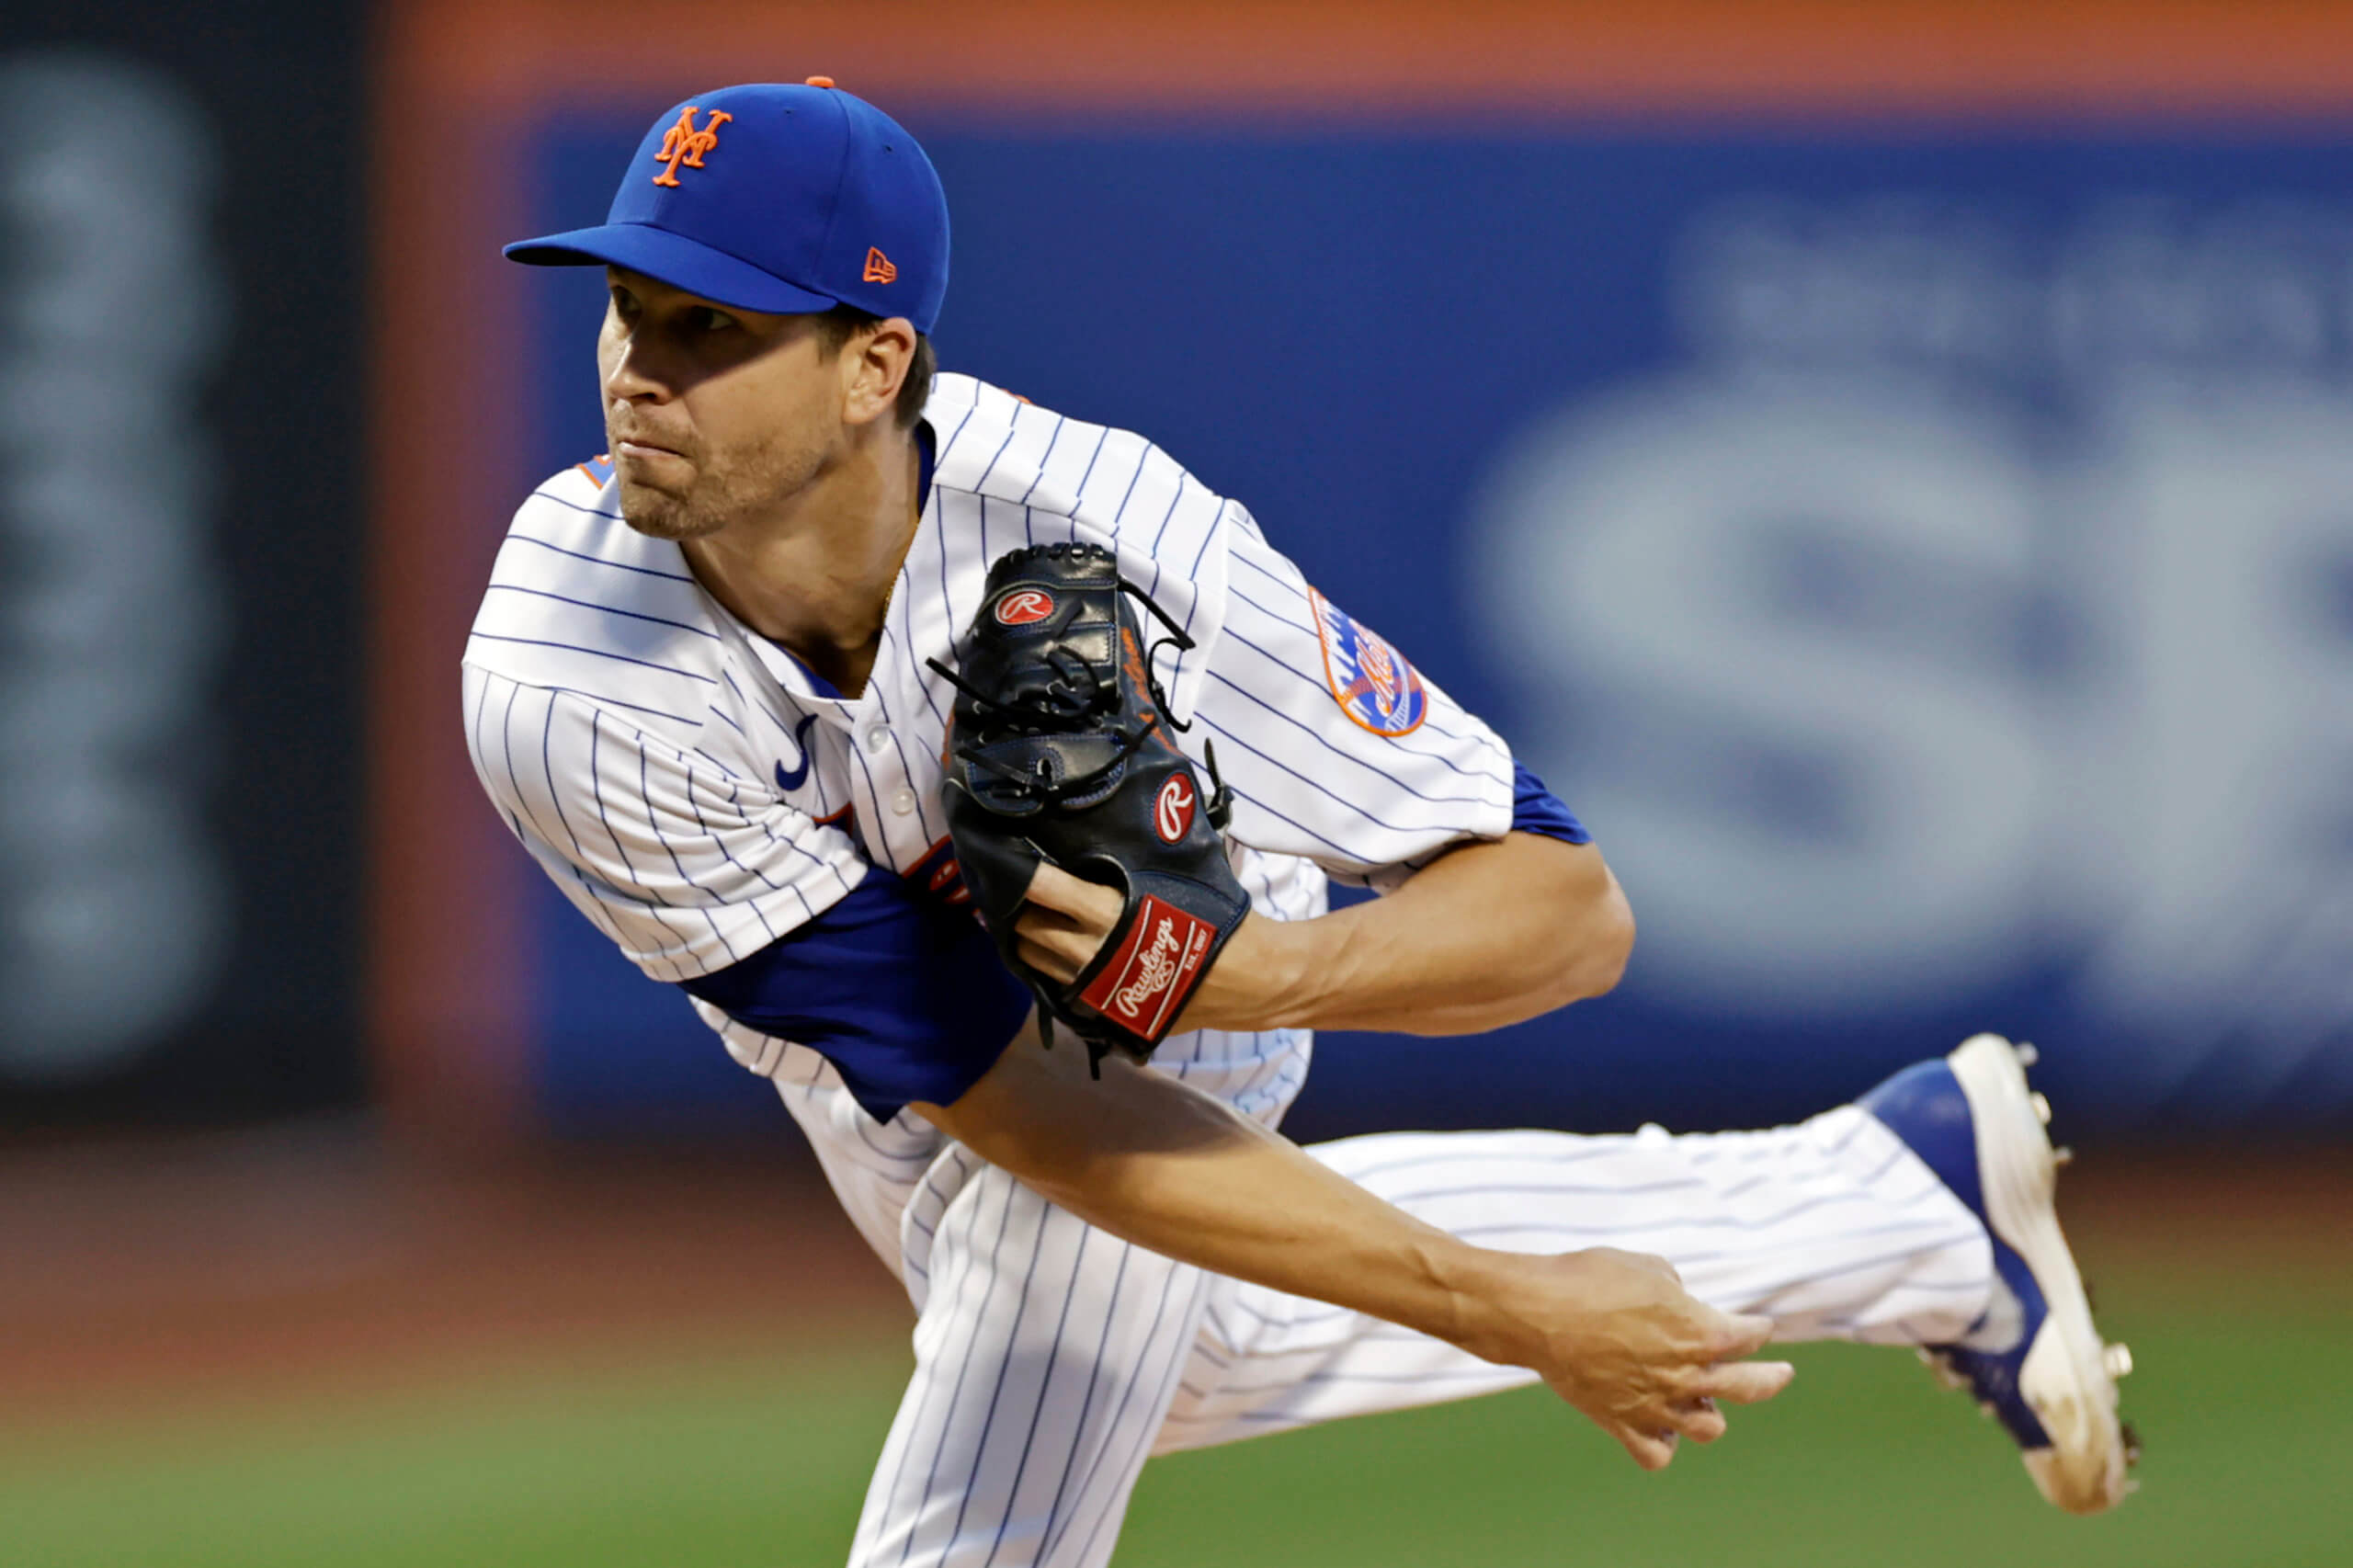 Jacob deGrom's gem bring Mets big hope for stretch run